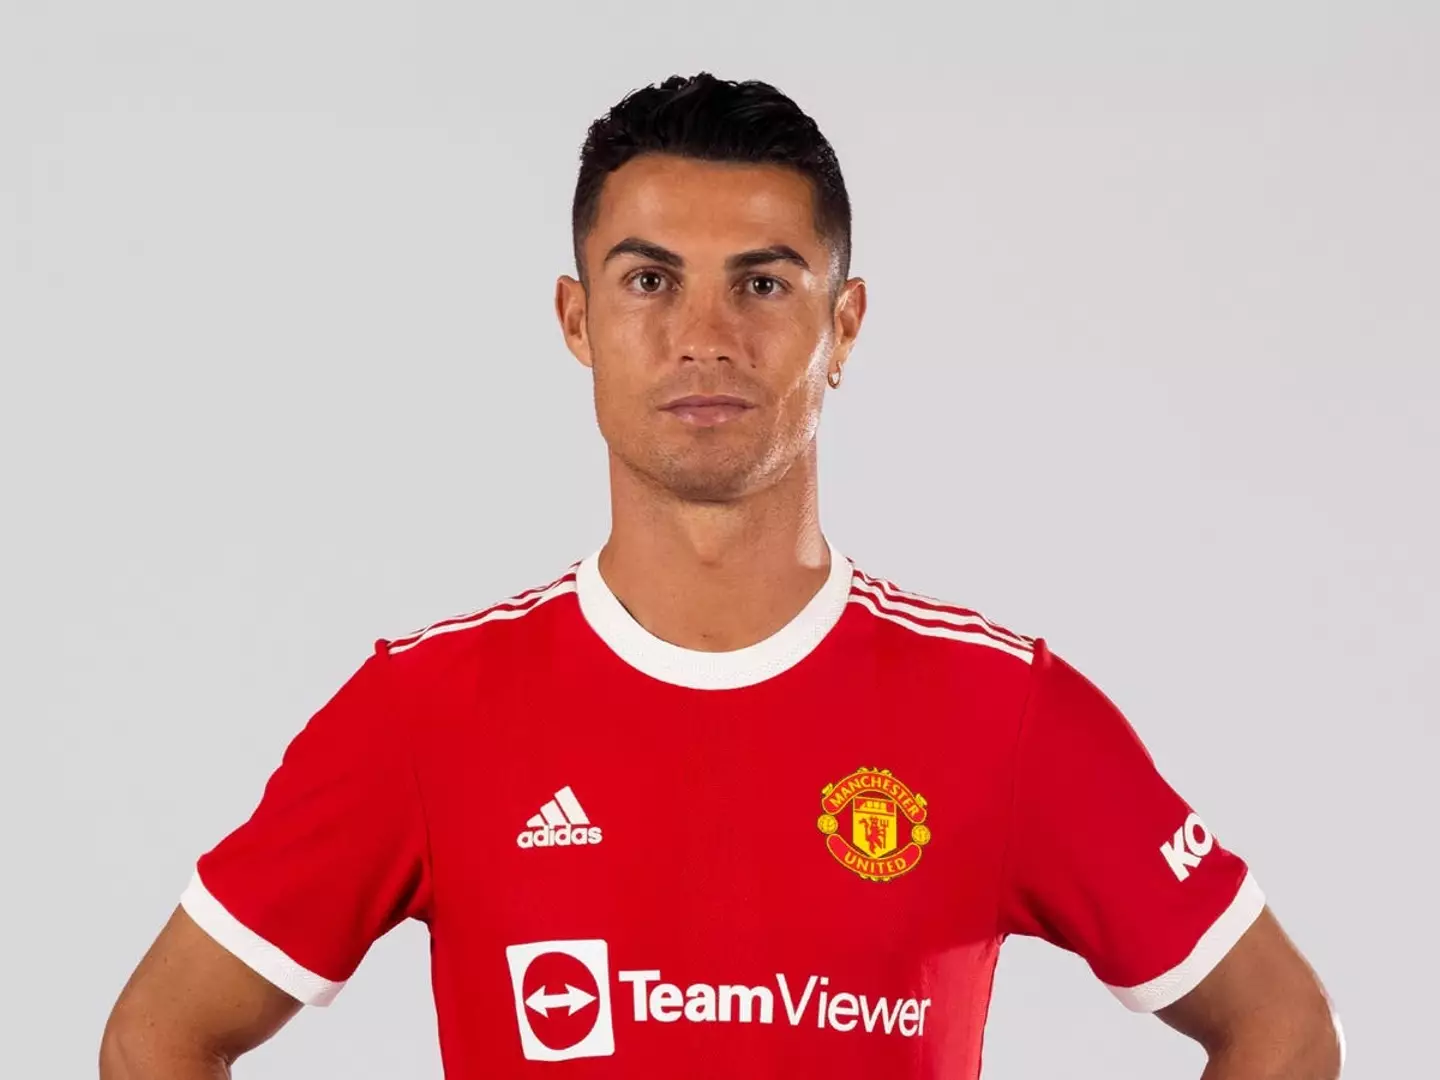 Manchester United legend Cristiano Ronaldo is in line to start against Newcastle United this weekend